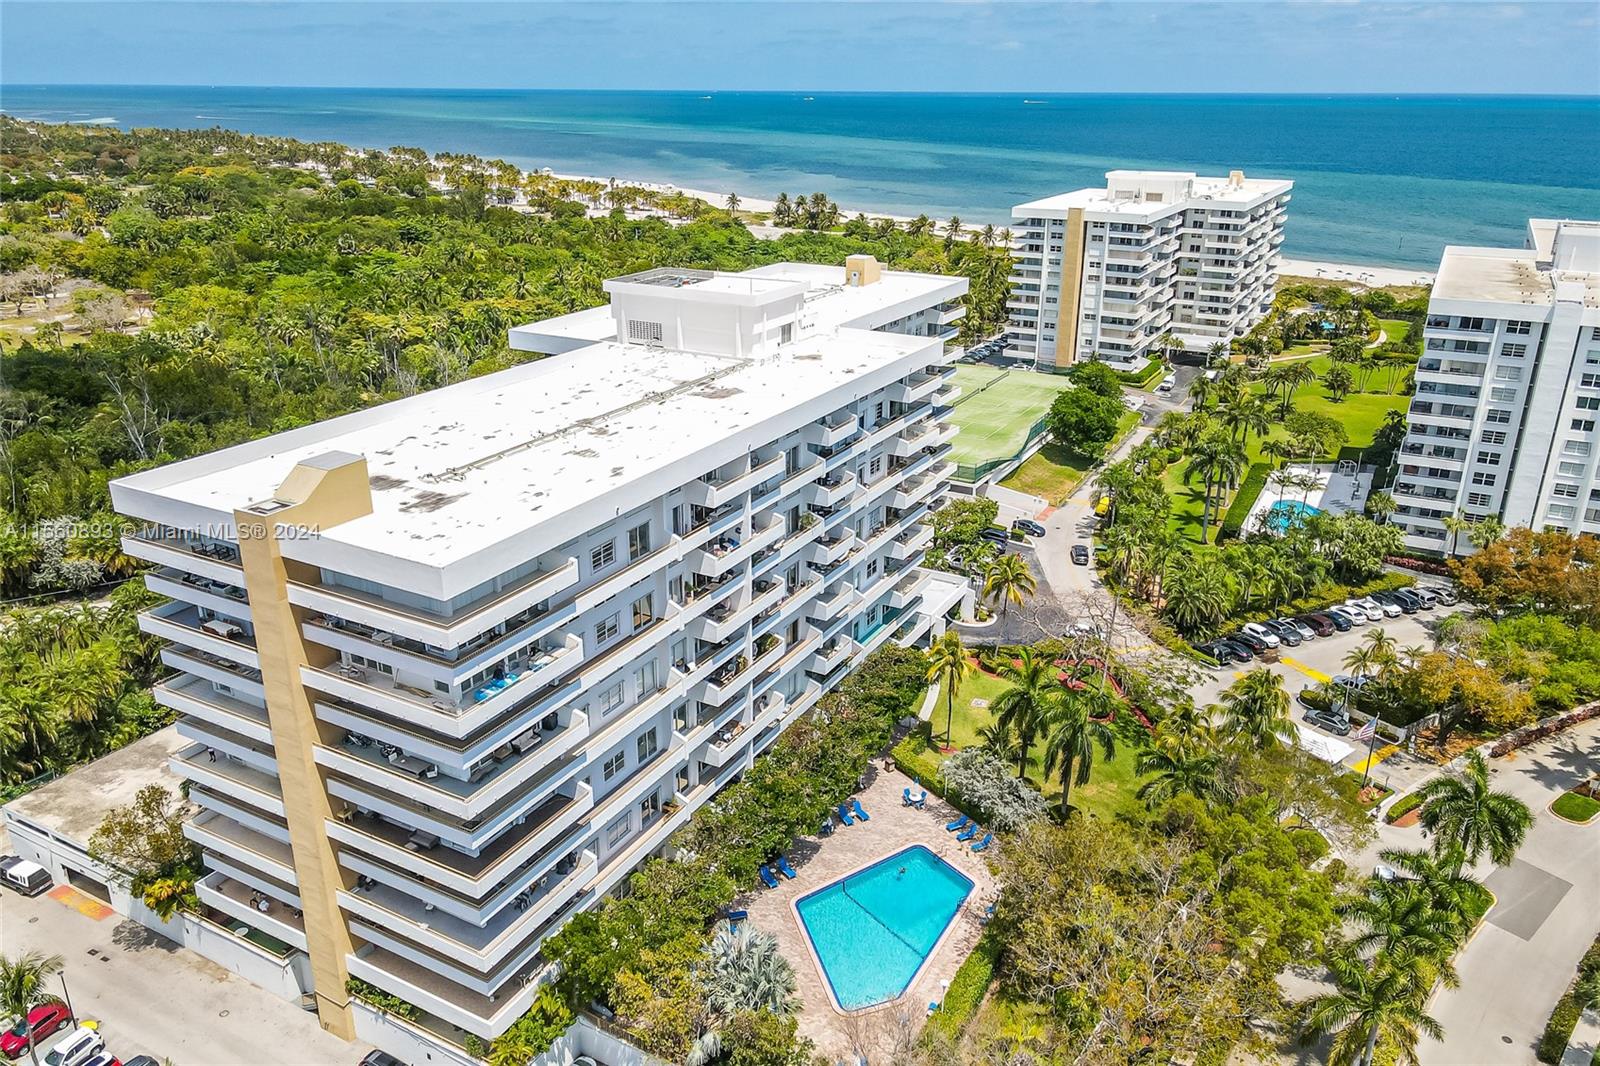 Gorgeous renovated fully furnished 2 bedroom and 2 bathroom unit by famous architect Ramon Alonso at the exclusive Commodore in Key Biscayne. features an open kitchen concept with custom cabinets in a high-gloss lacquer finish. Engineered wood floors throughout the unit. The primary bedroom is an en-suite remodeled bathroom with double sinks and plenty of storage. Comes with one assigned and covered parking space. Commodore Club is a very well-maintained building with many amenities such as direct and private beach access where umbrellas and chairs are provided, tennis courts, a heated pool, an exercise room, and more. Don't miss this opportunity.